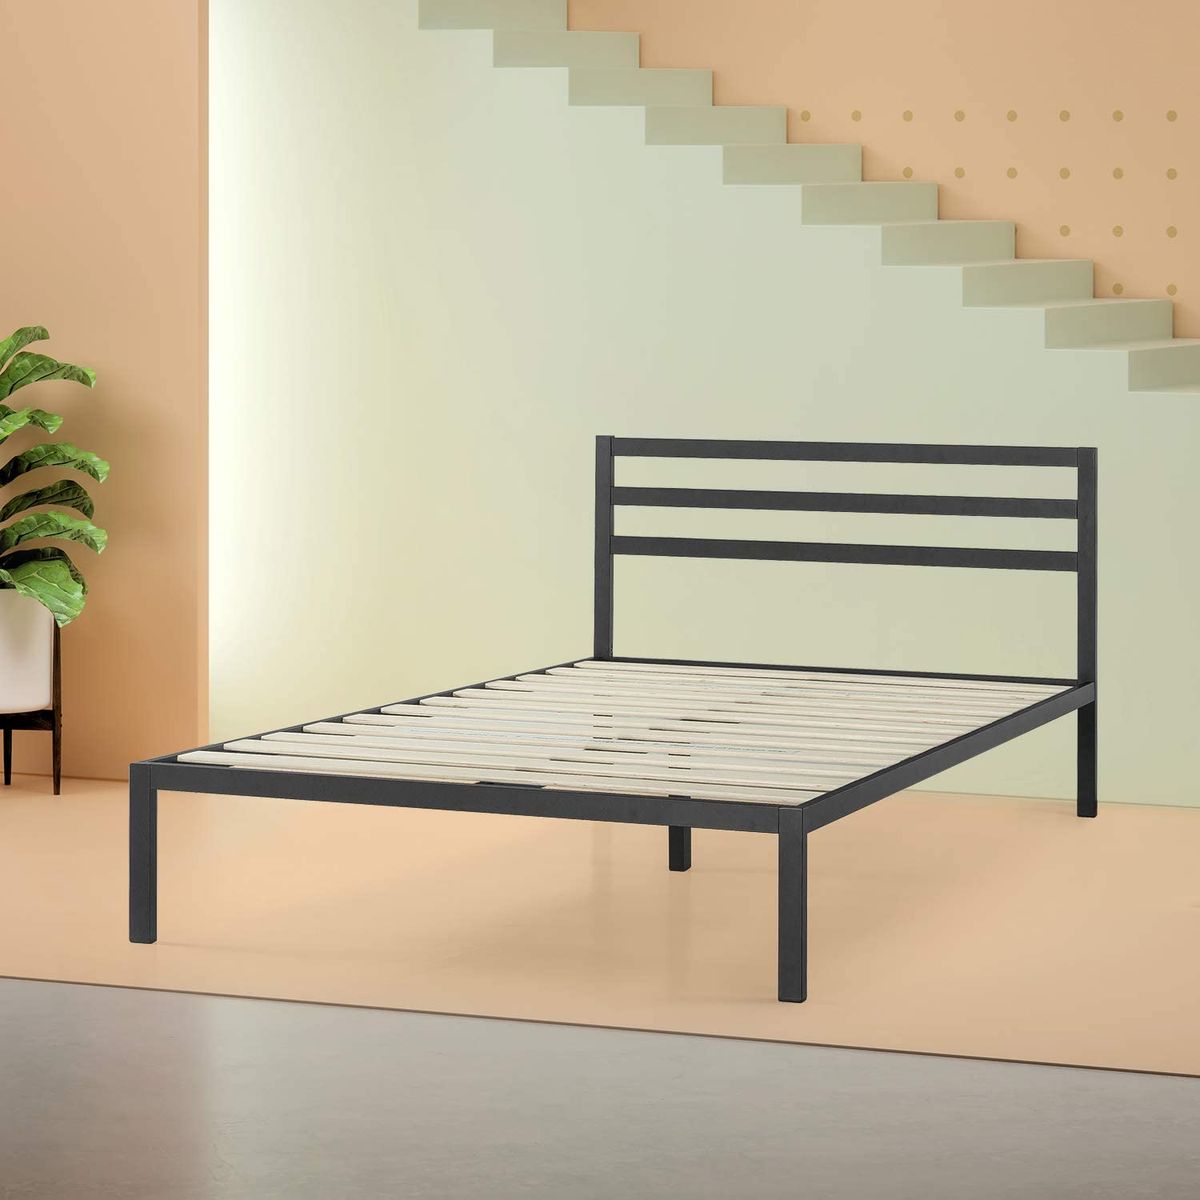 19 Best Metal Bed Frames 2022 The, How To Set Up A Full Size Metal Bed Frame